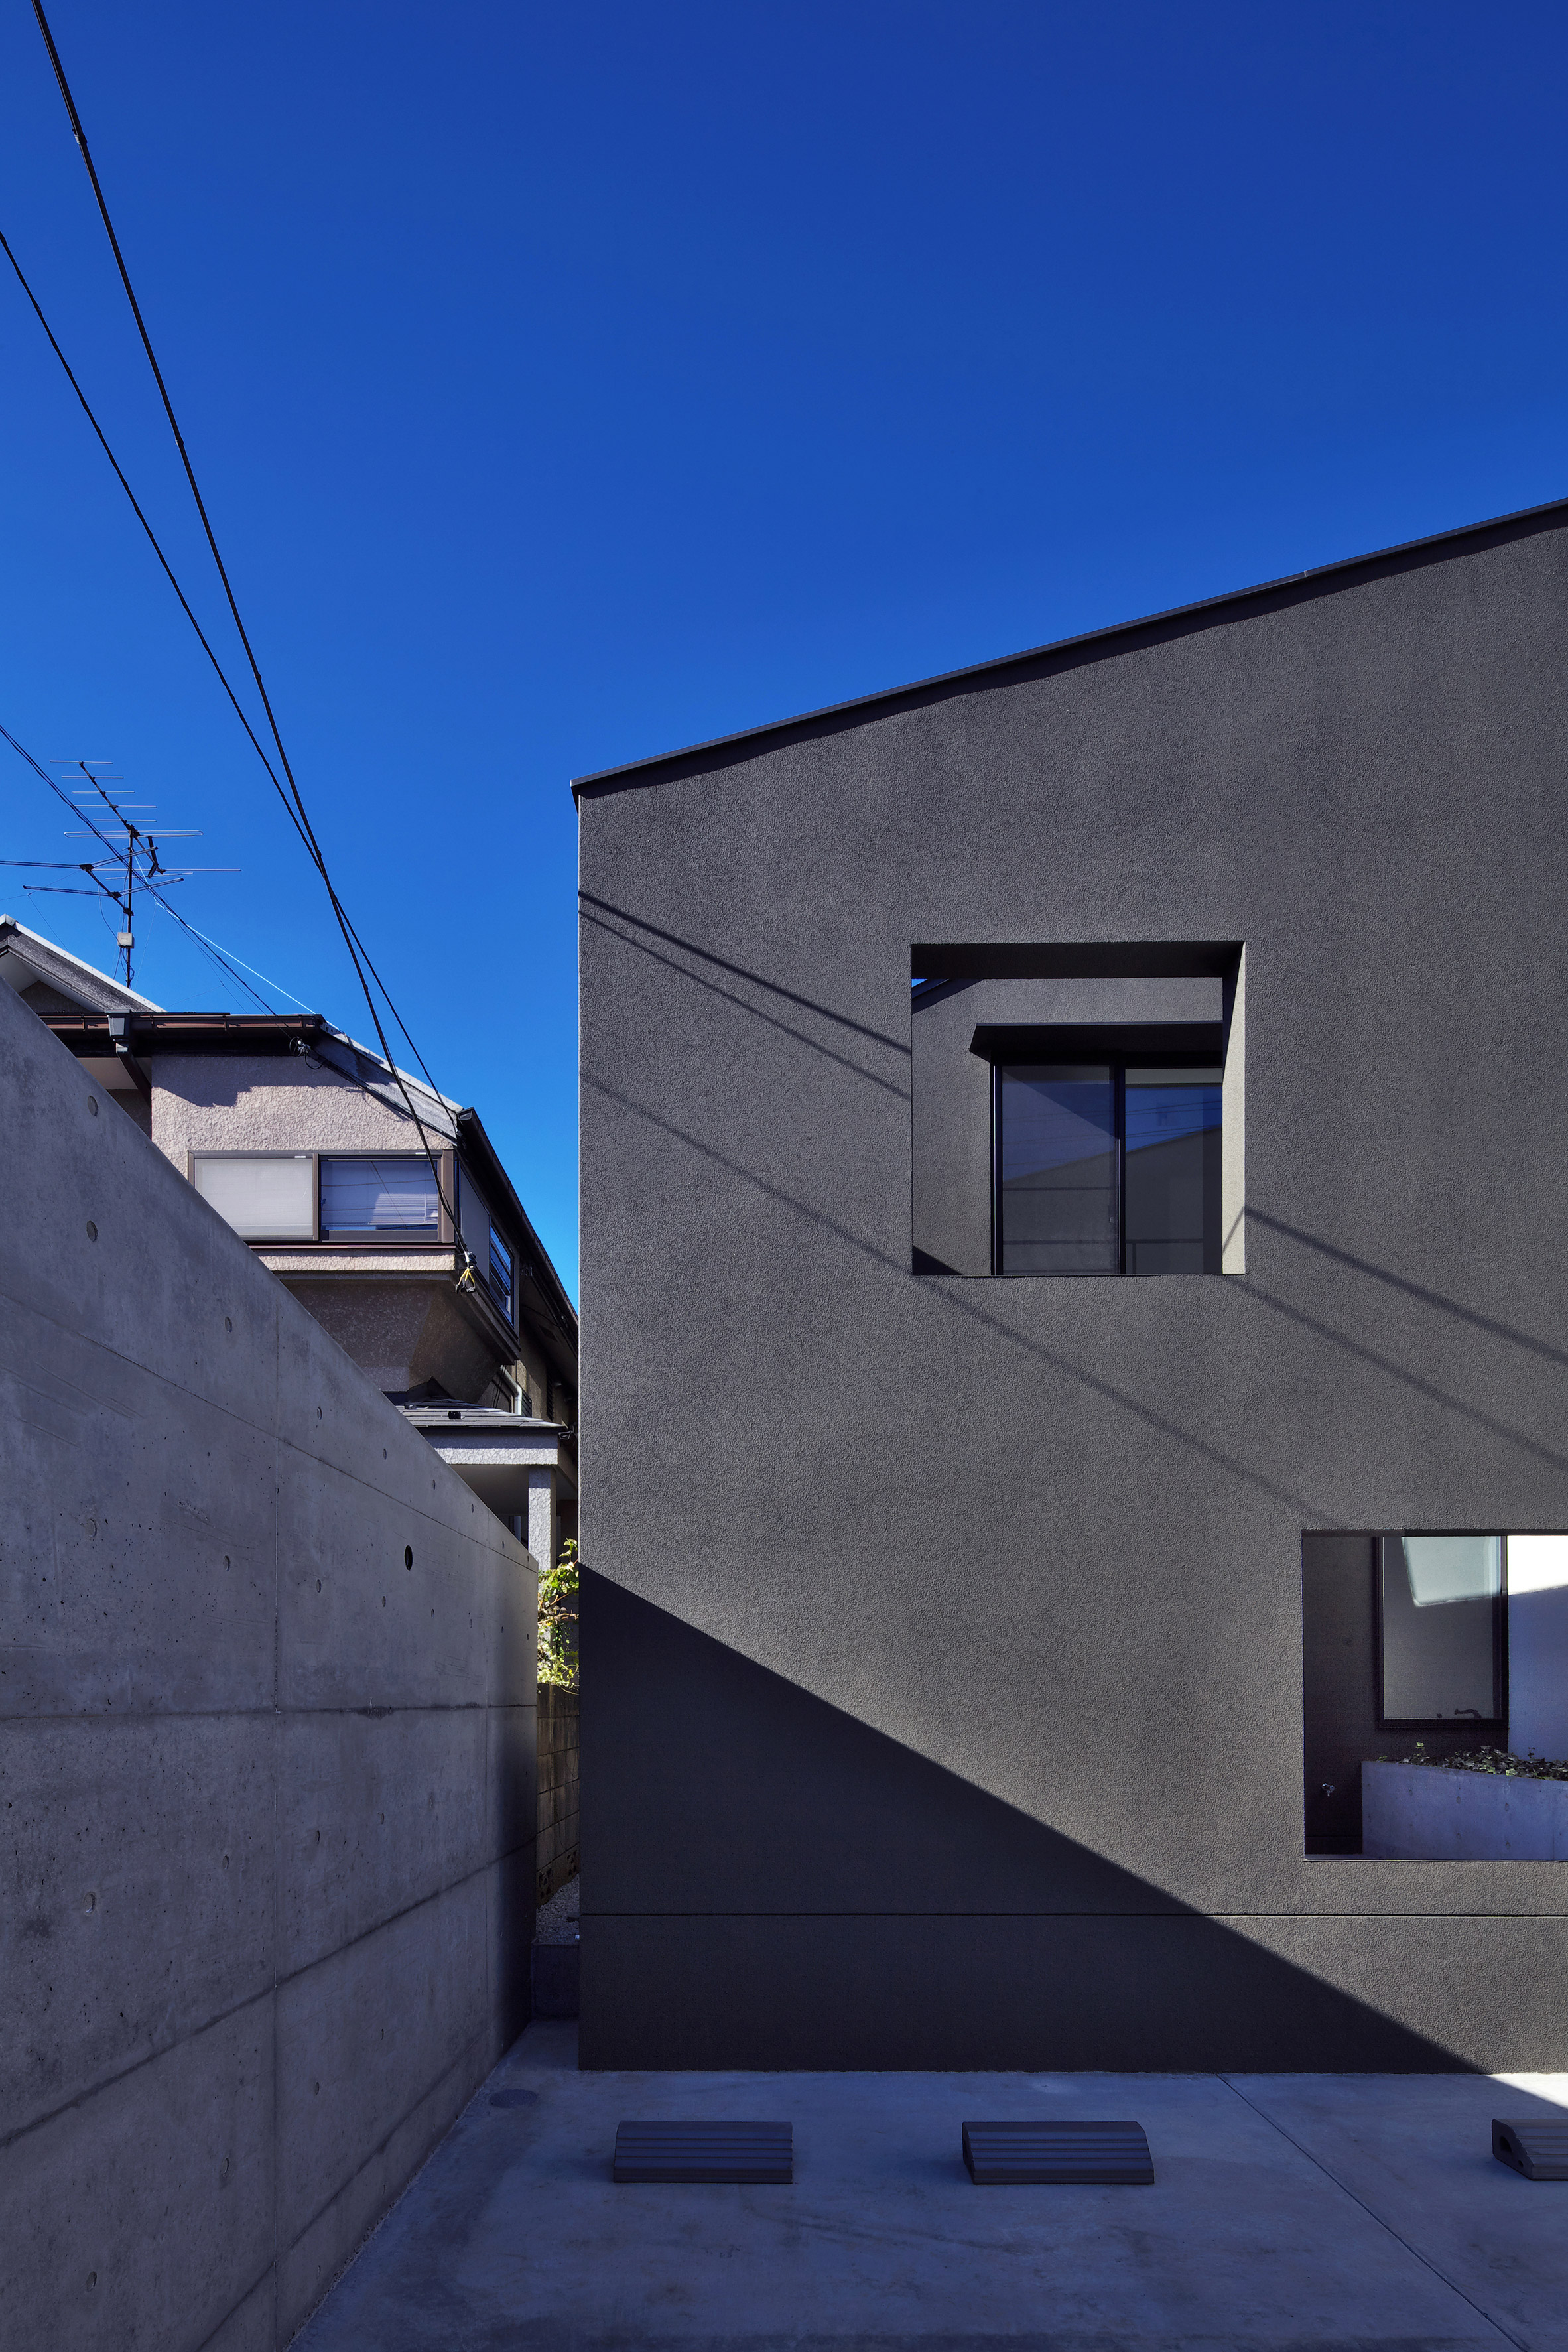 house-of-fluctuations-satoru-hirota-architects-architecture-tokyo-japan-residential_dezeen_2364_col_16